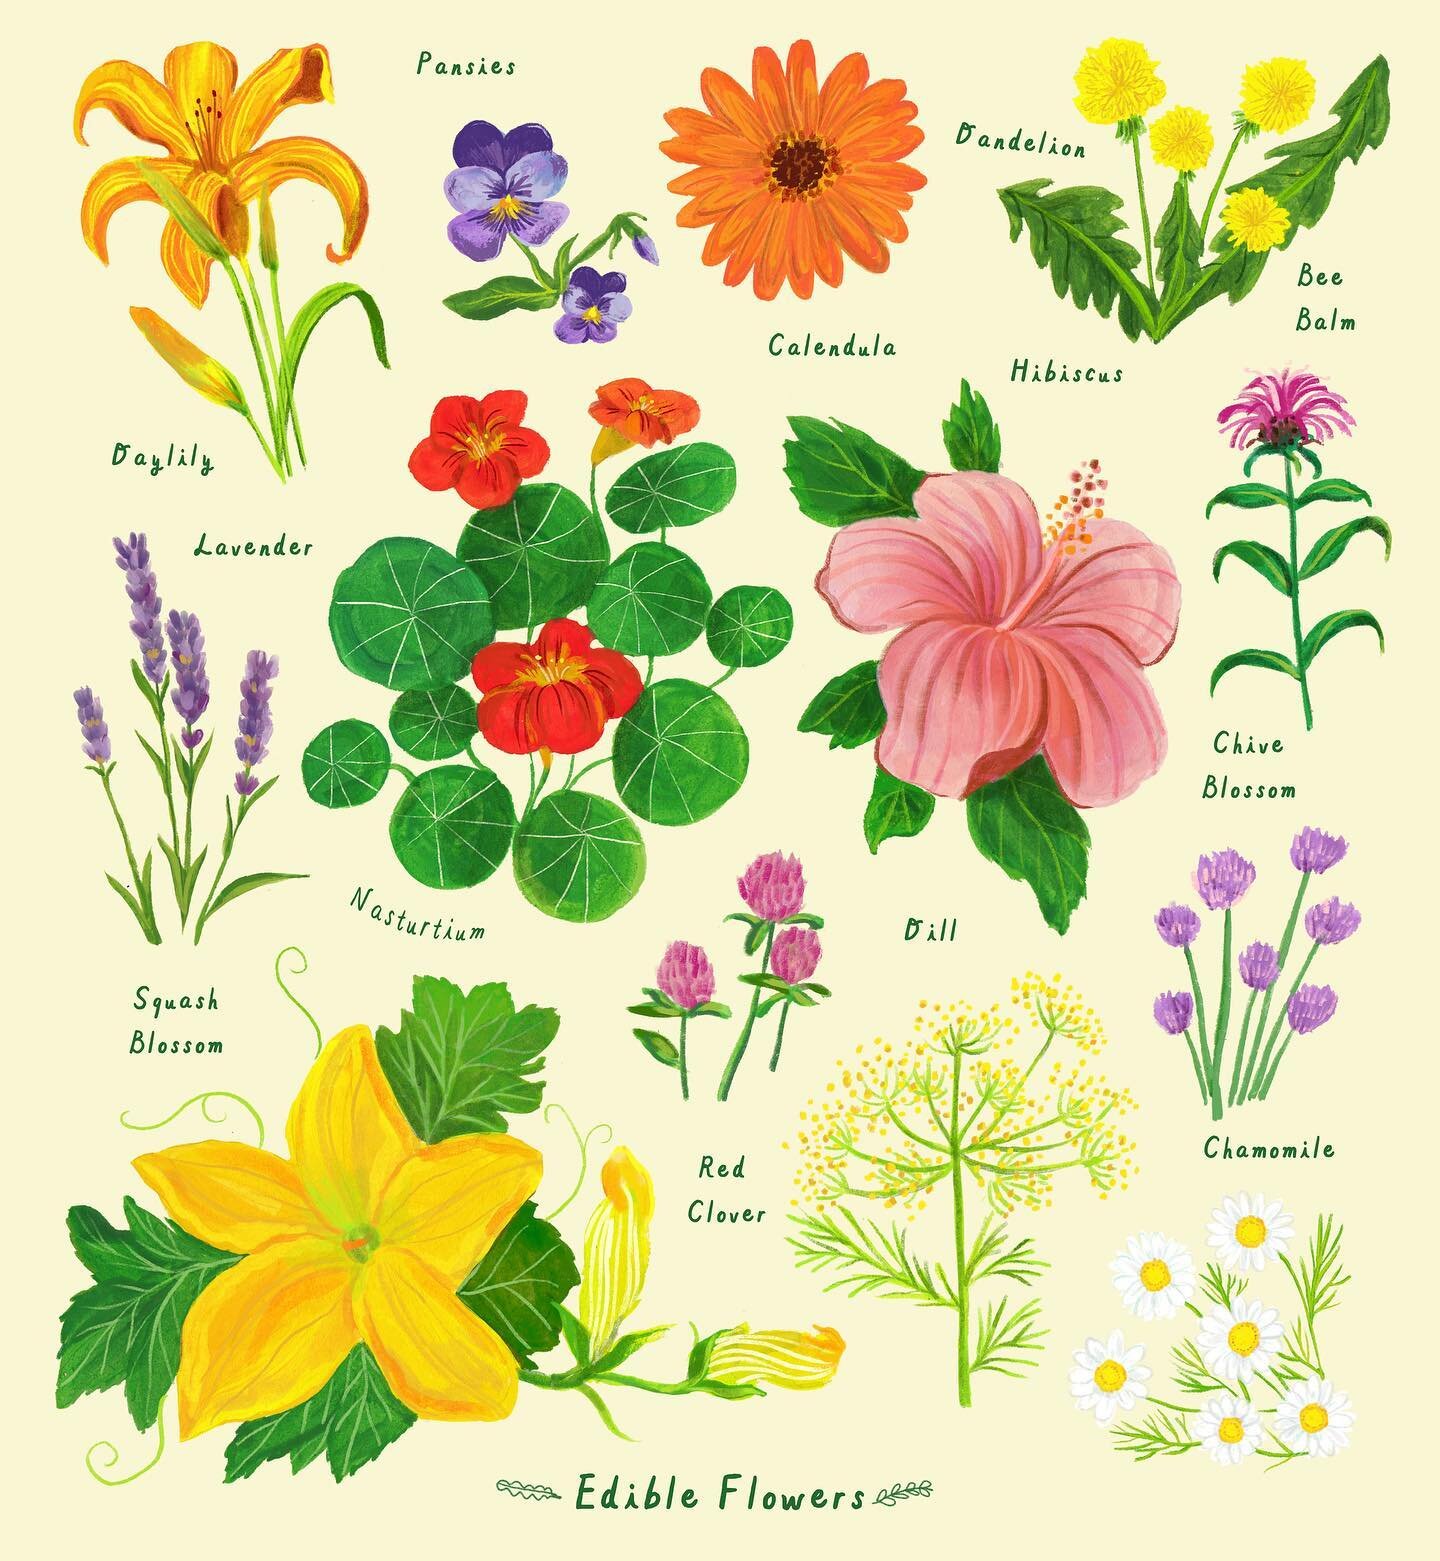 May, here and there. 
All the edible beauties popping everywhere. 
.
It&rsquo;s spring time here in Upstate, which means it&rsquo;s time to start foraging and identifying things in the wild and in my yard. 
I cannot wait to get planting in my garden 